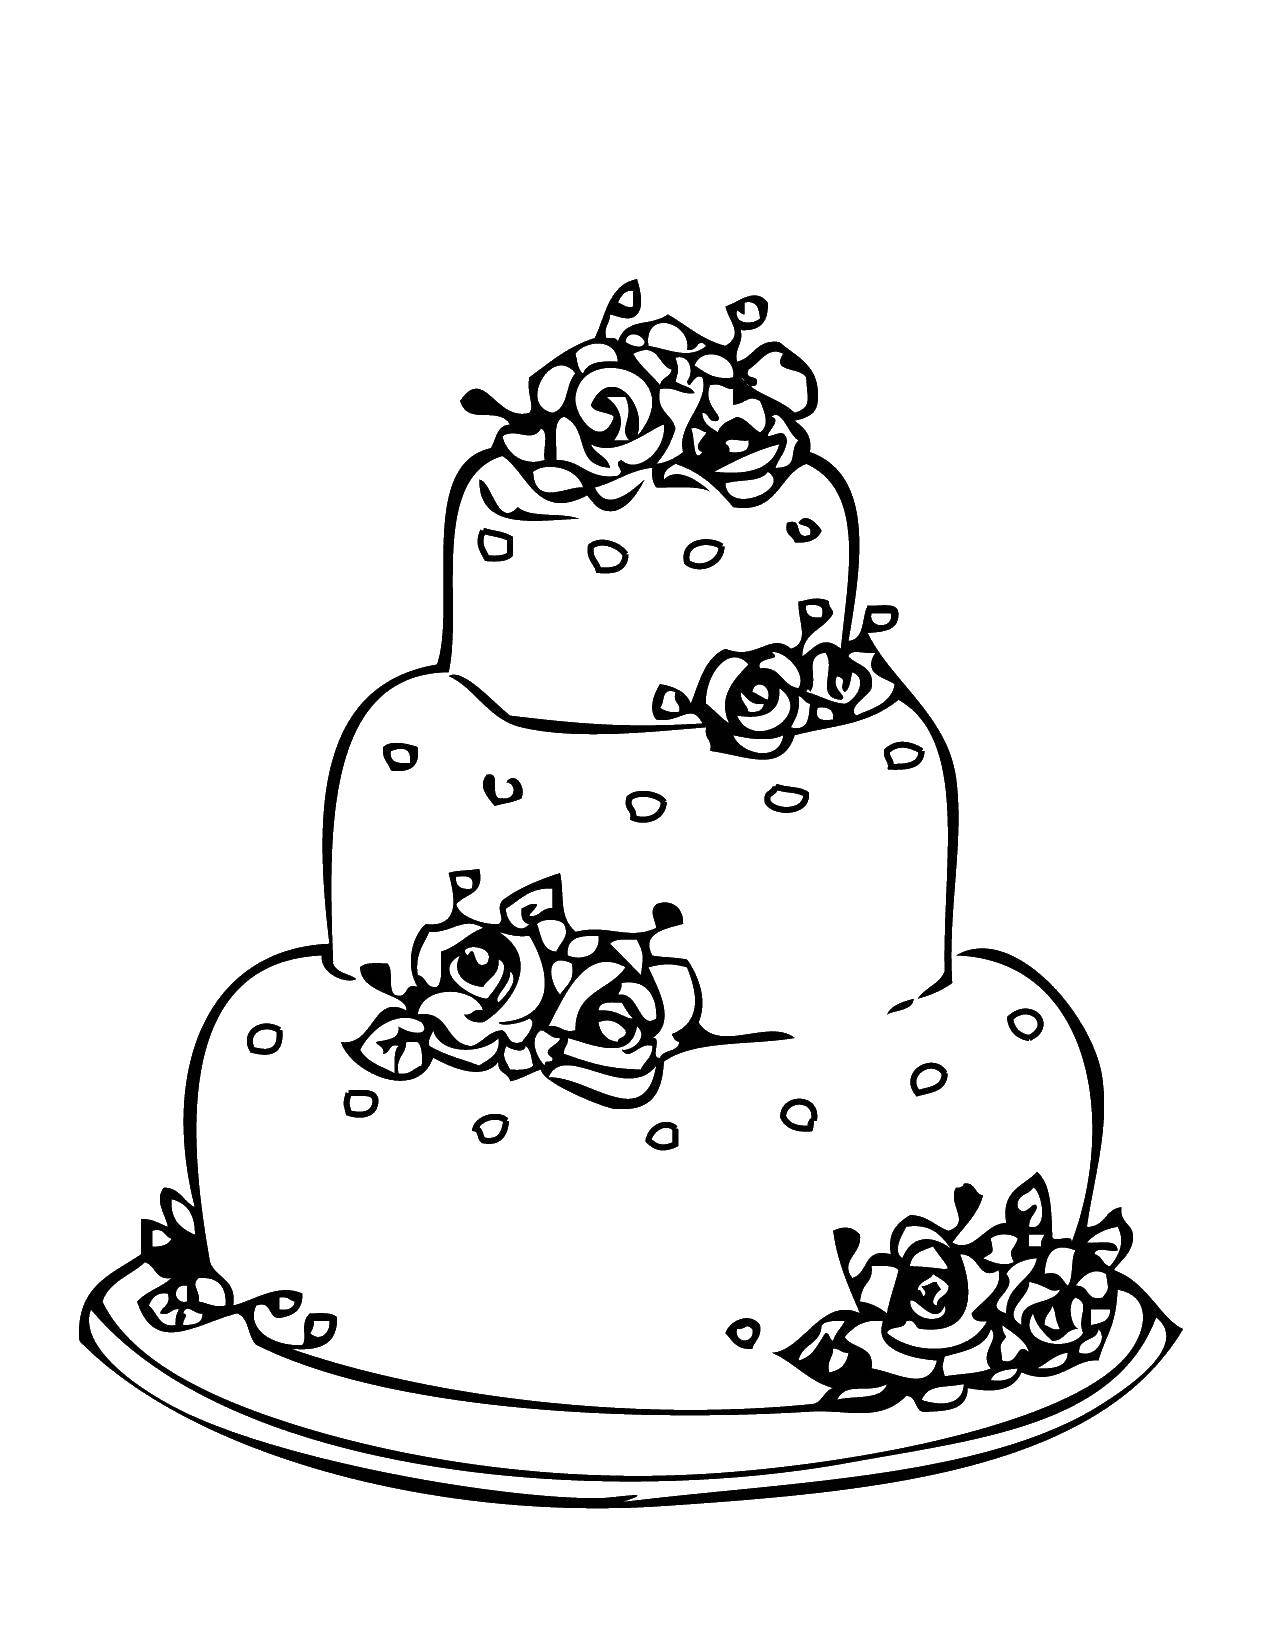 Coloring Wedding cake with roses. Category cakes. Tags:  cakes, sweets, roses.